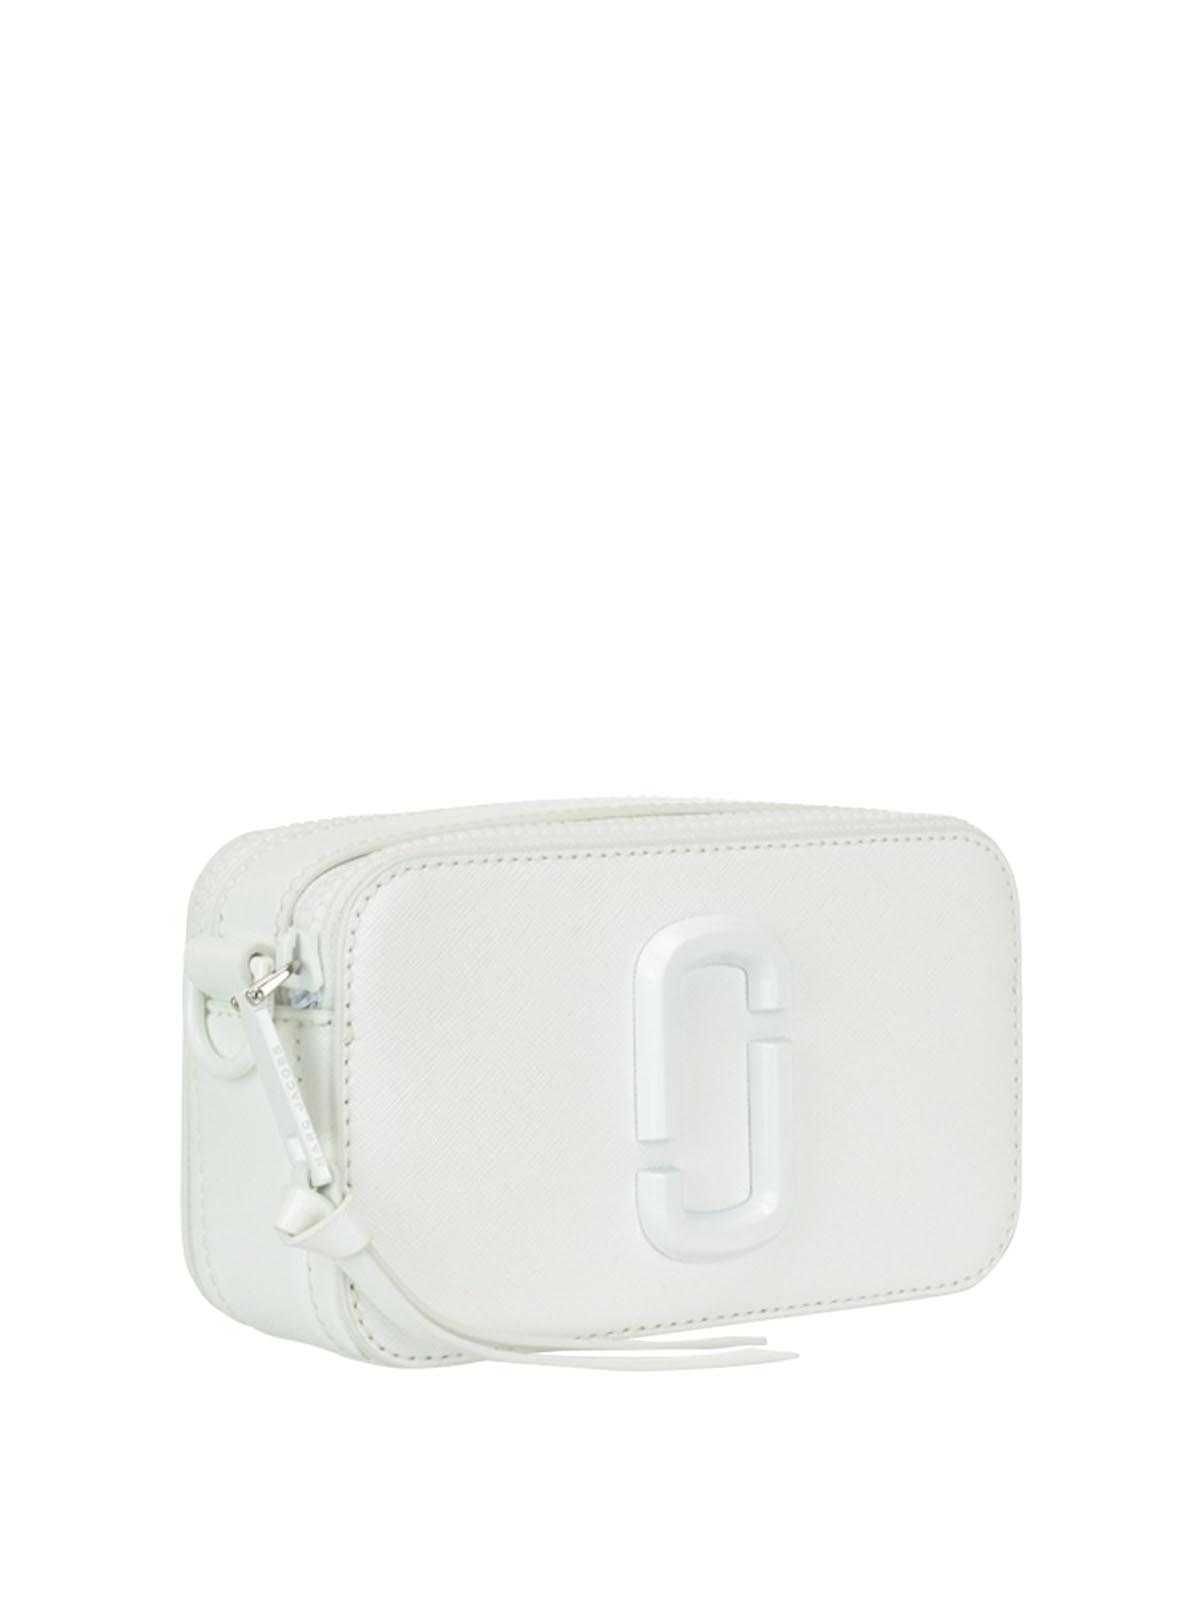 Marc Jacobs The Snapshot black and white bag